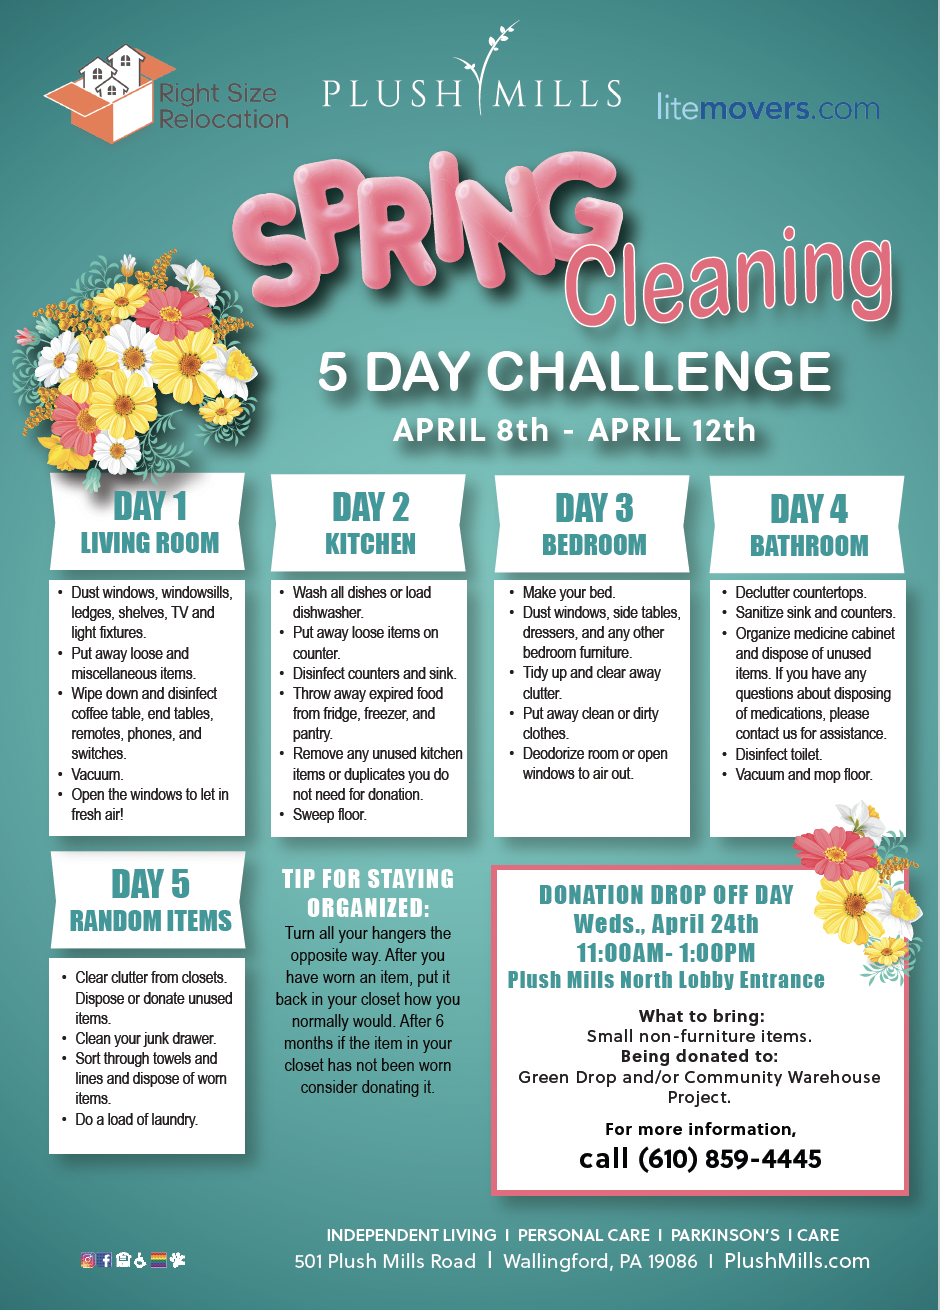 Plush Mills - Spring Cleaning Challenge